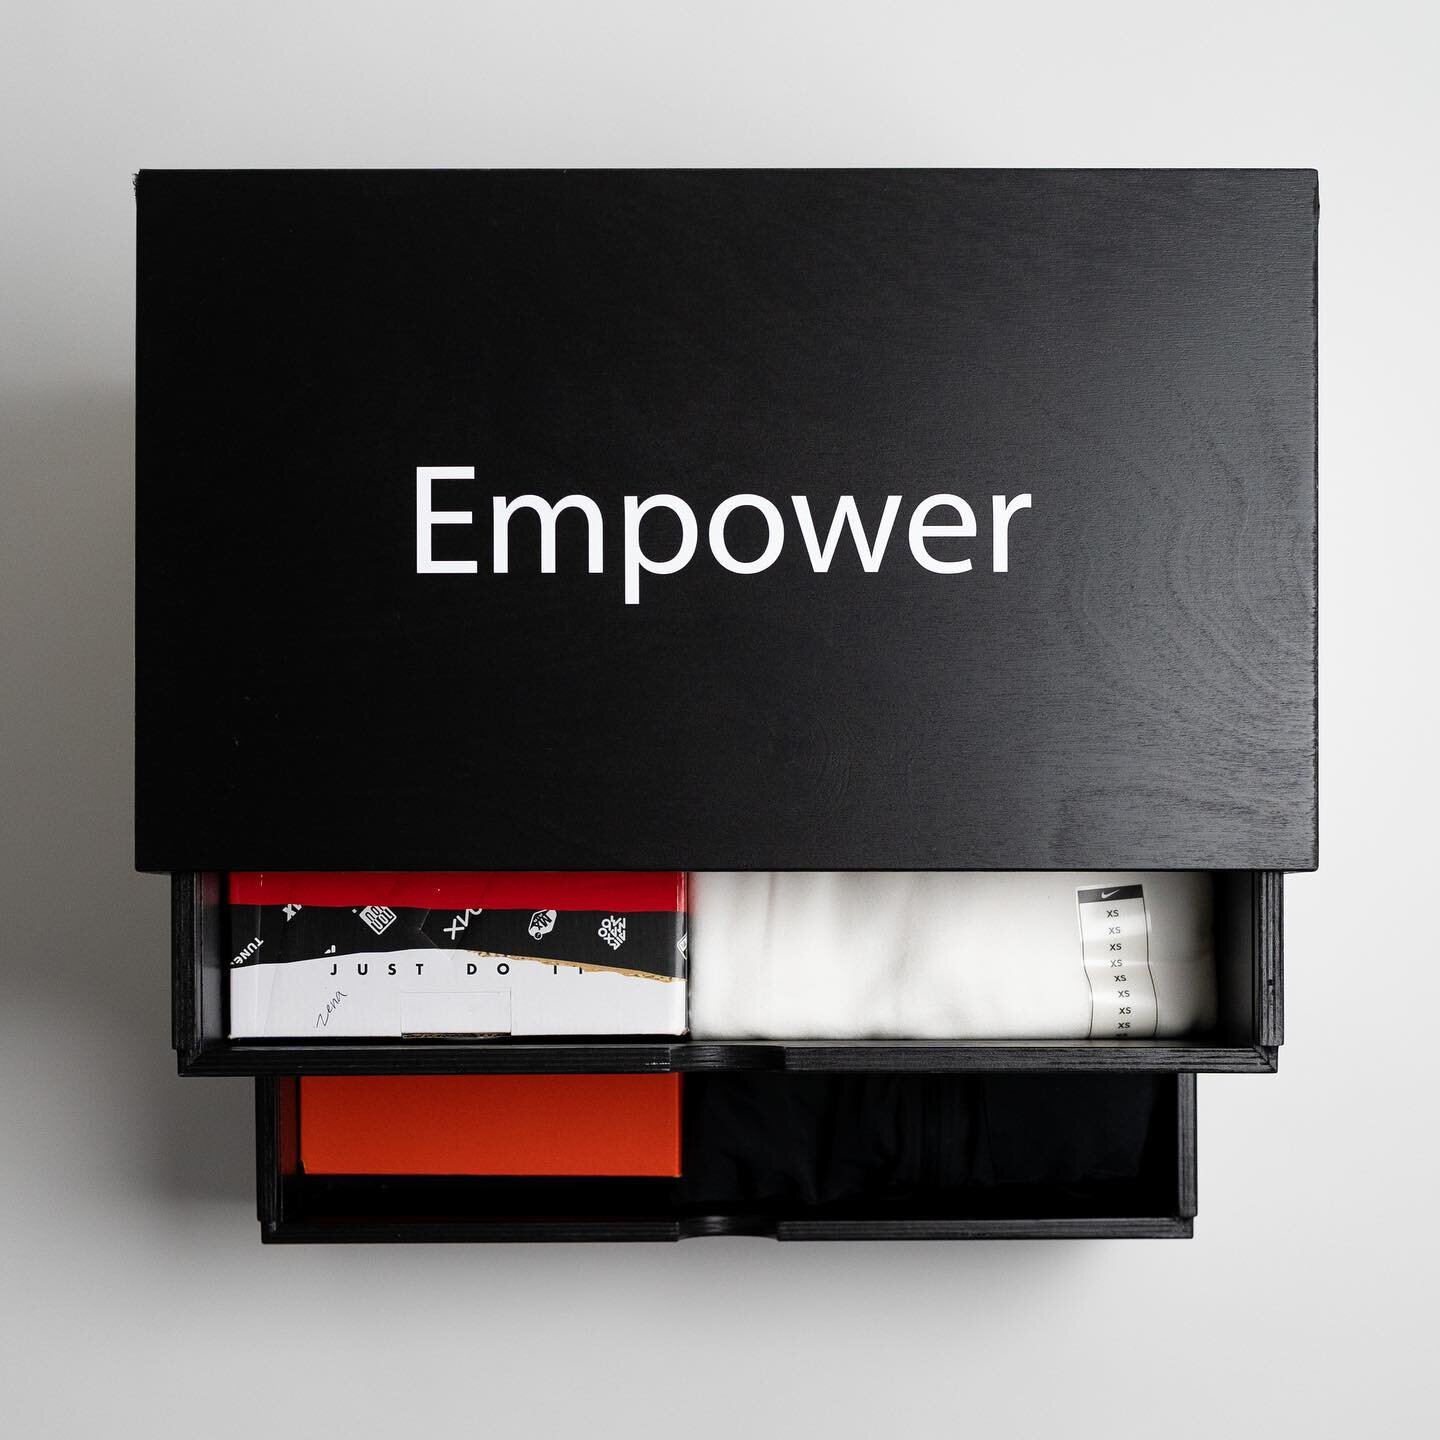 Presenting: The Empower Seeding Kit with @nike 

In order to truly empower women, we have to take the proper steps. We must honor and uplift them to make sure their voices are able to be heard. 

This kit was filled with gear from @nike curated by @b